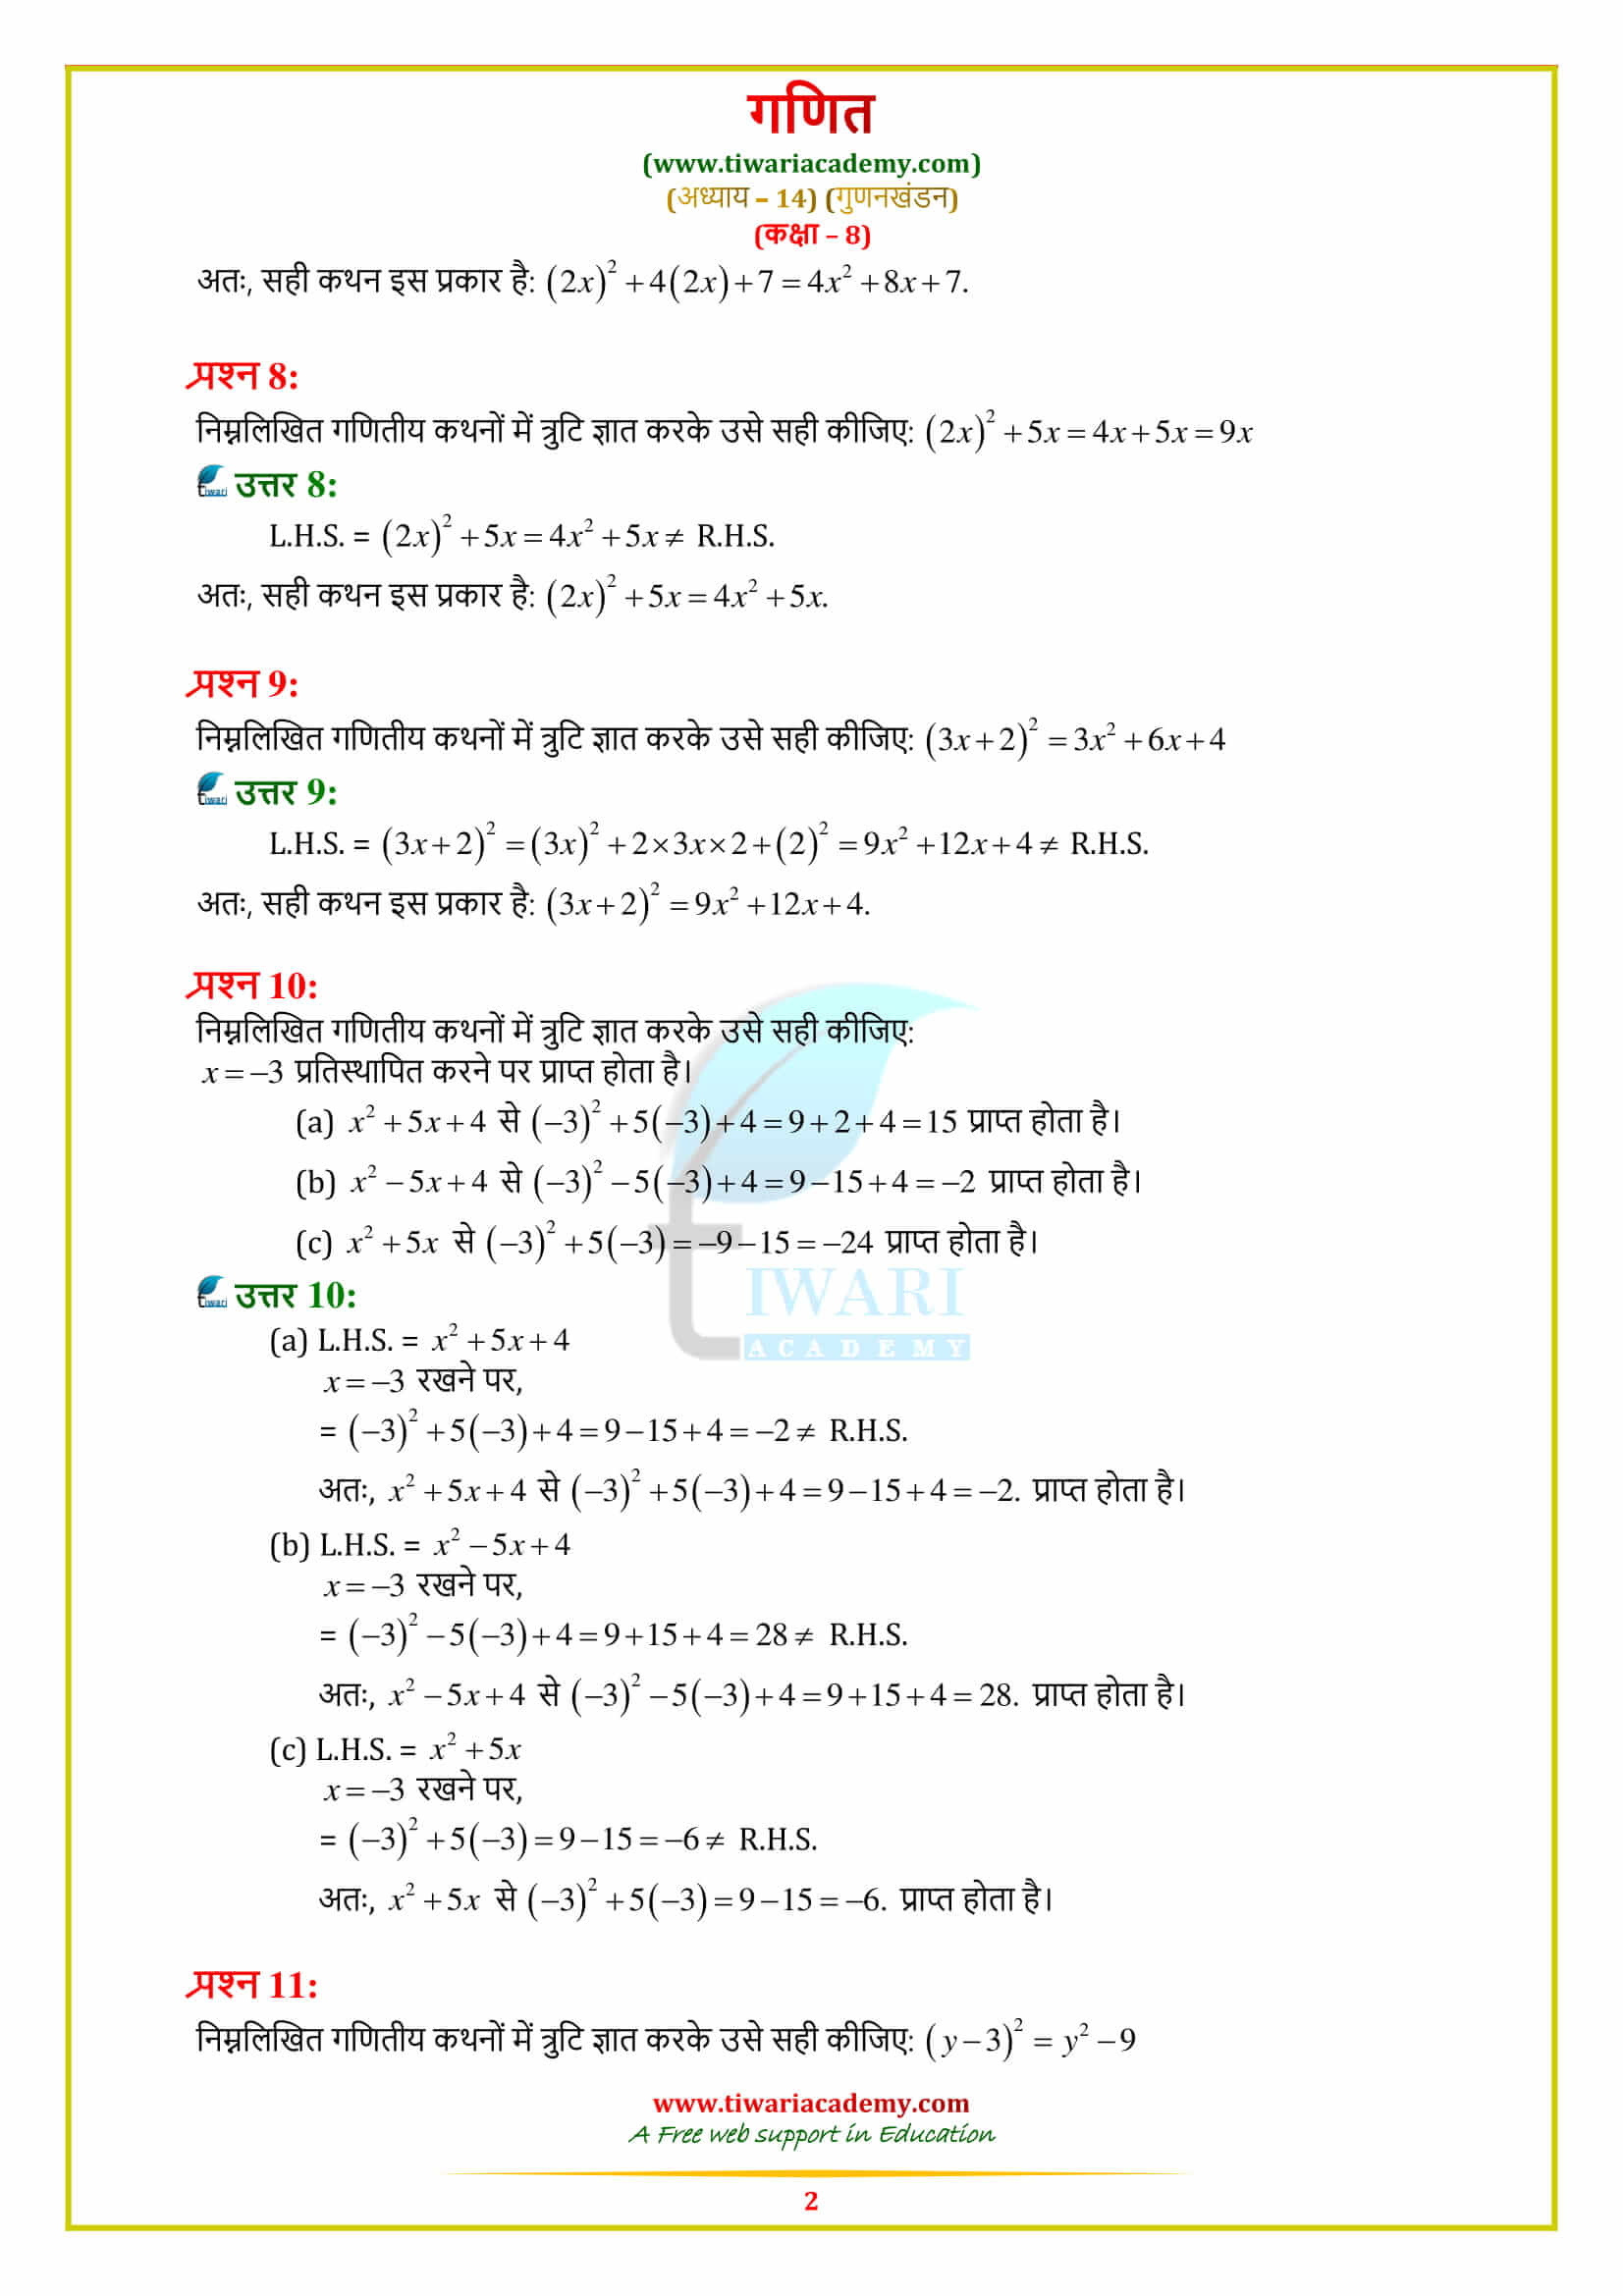 8 Maths Exercise 14.4 solutions in pdf form